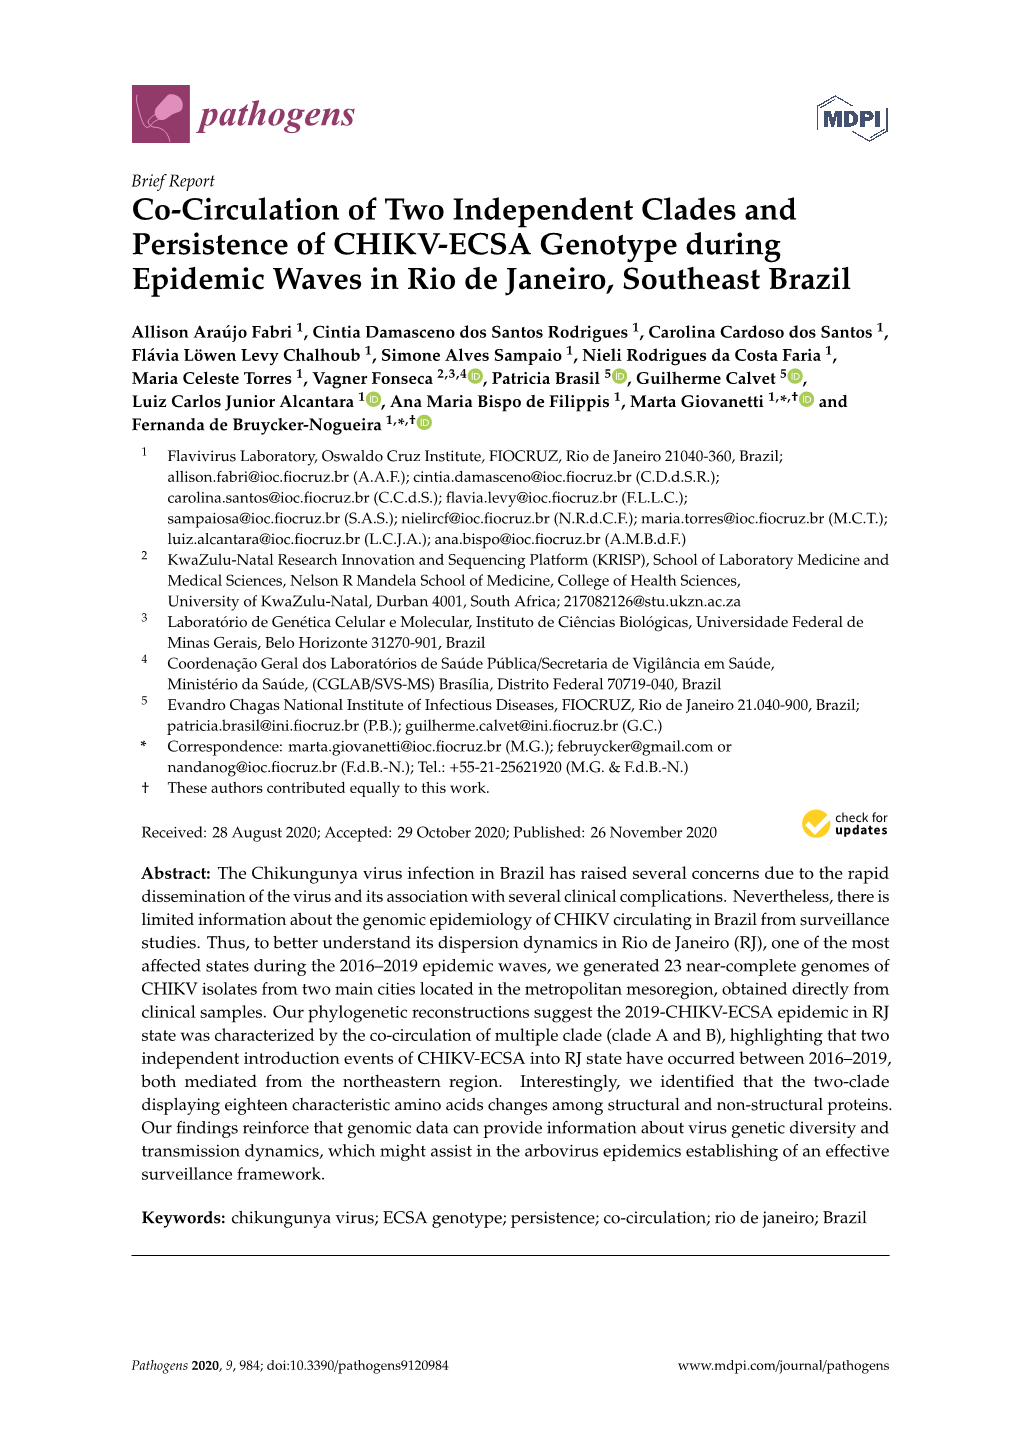 Co-Circulation of Two Independent Clades and Persistence of CHIKV-ECSA Genotype During Epidemic Waves in Rio De Janeiro, Southeast Brazil